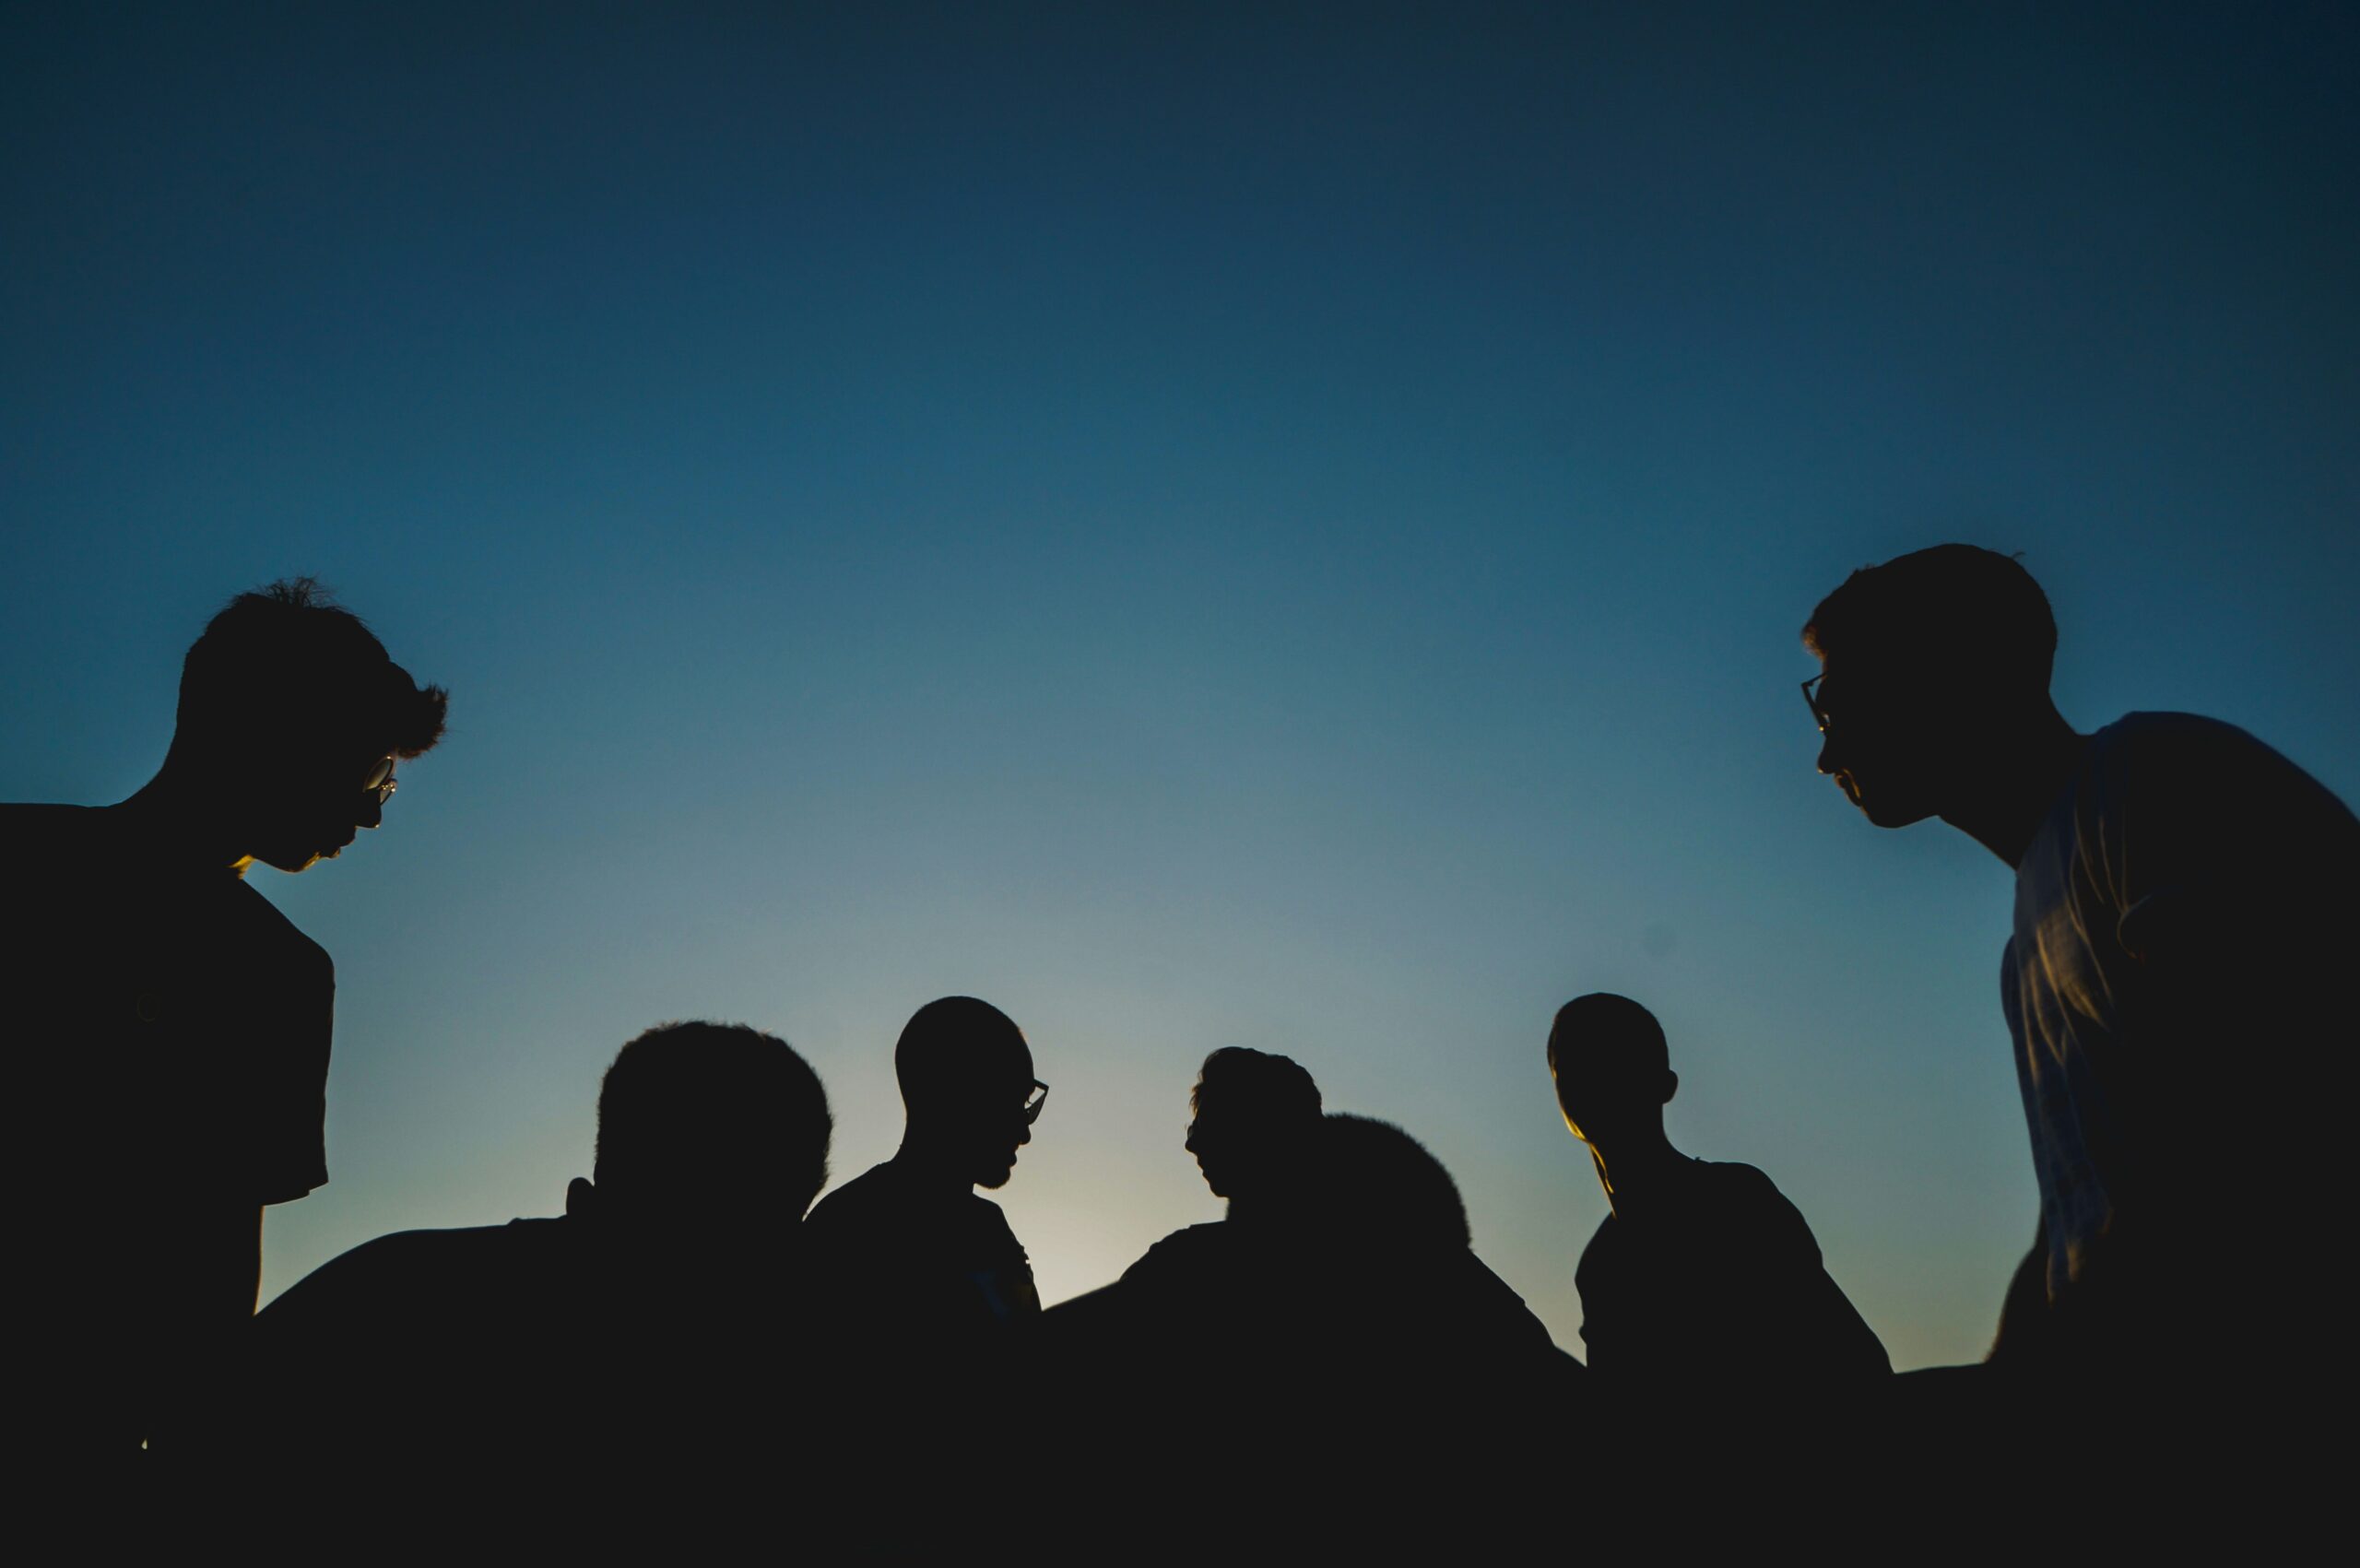 7 people in silhouette